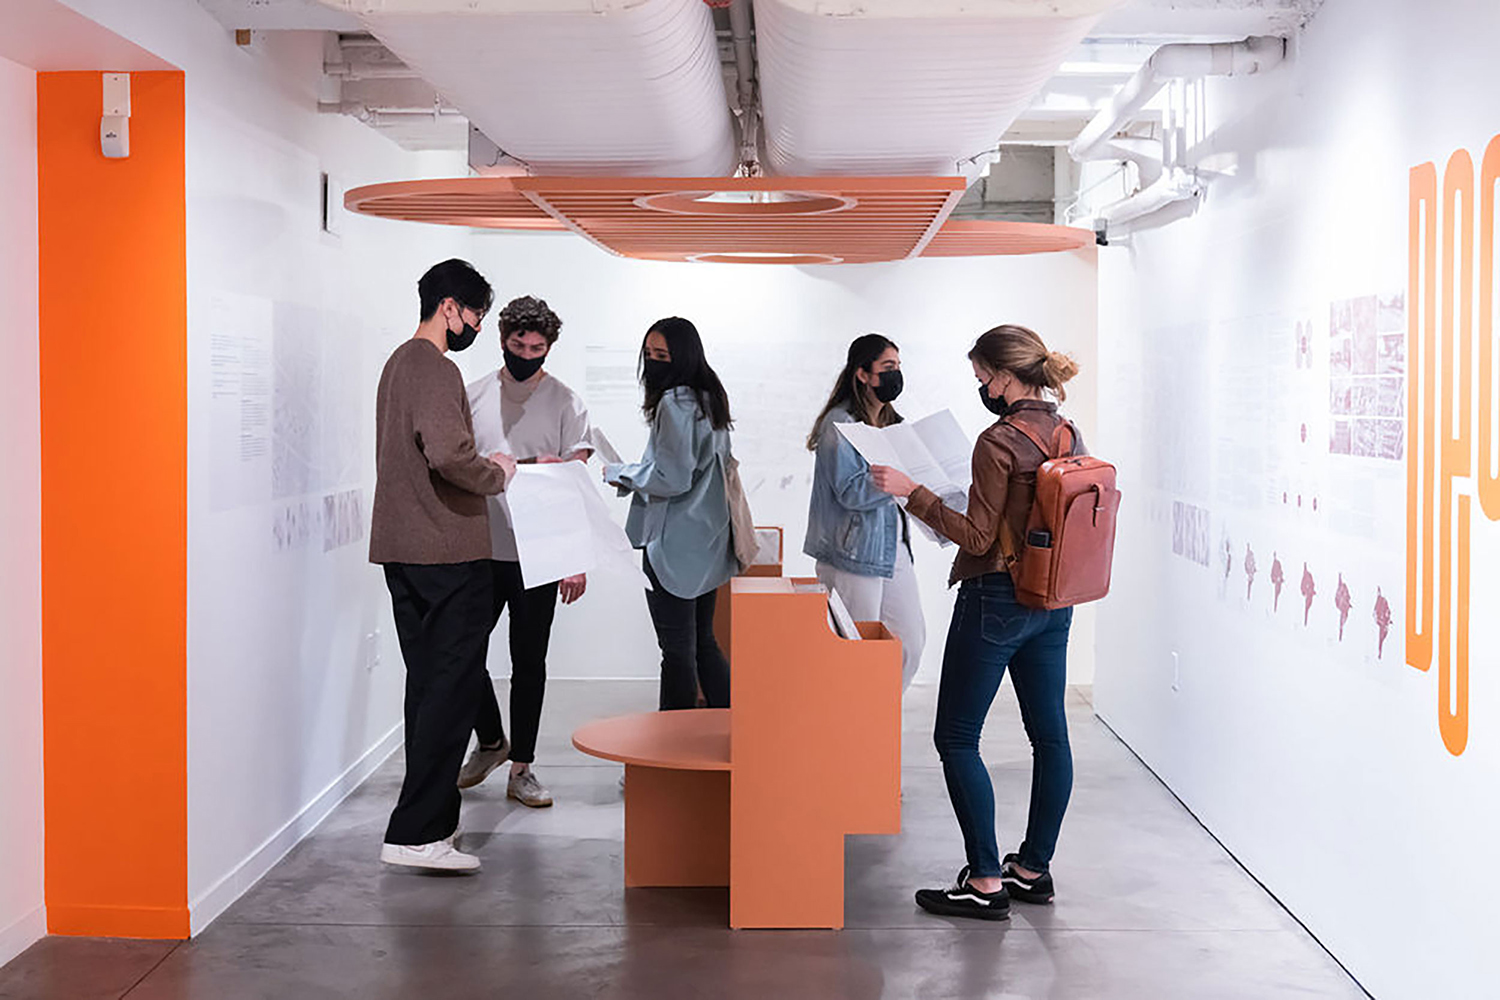 Installation view with five people standing and reading exhibition content behind an orange seat with an orange trellis installed above them